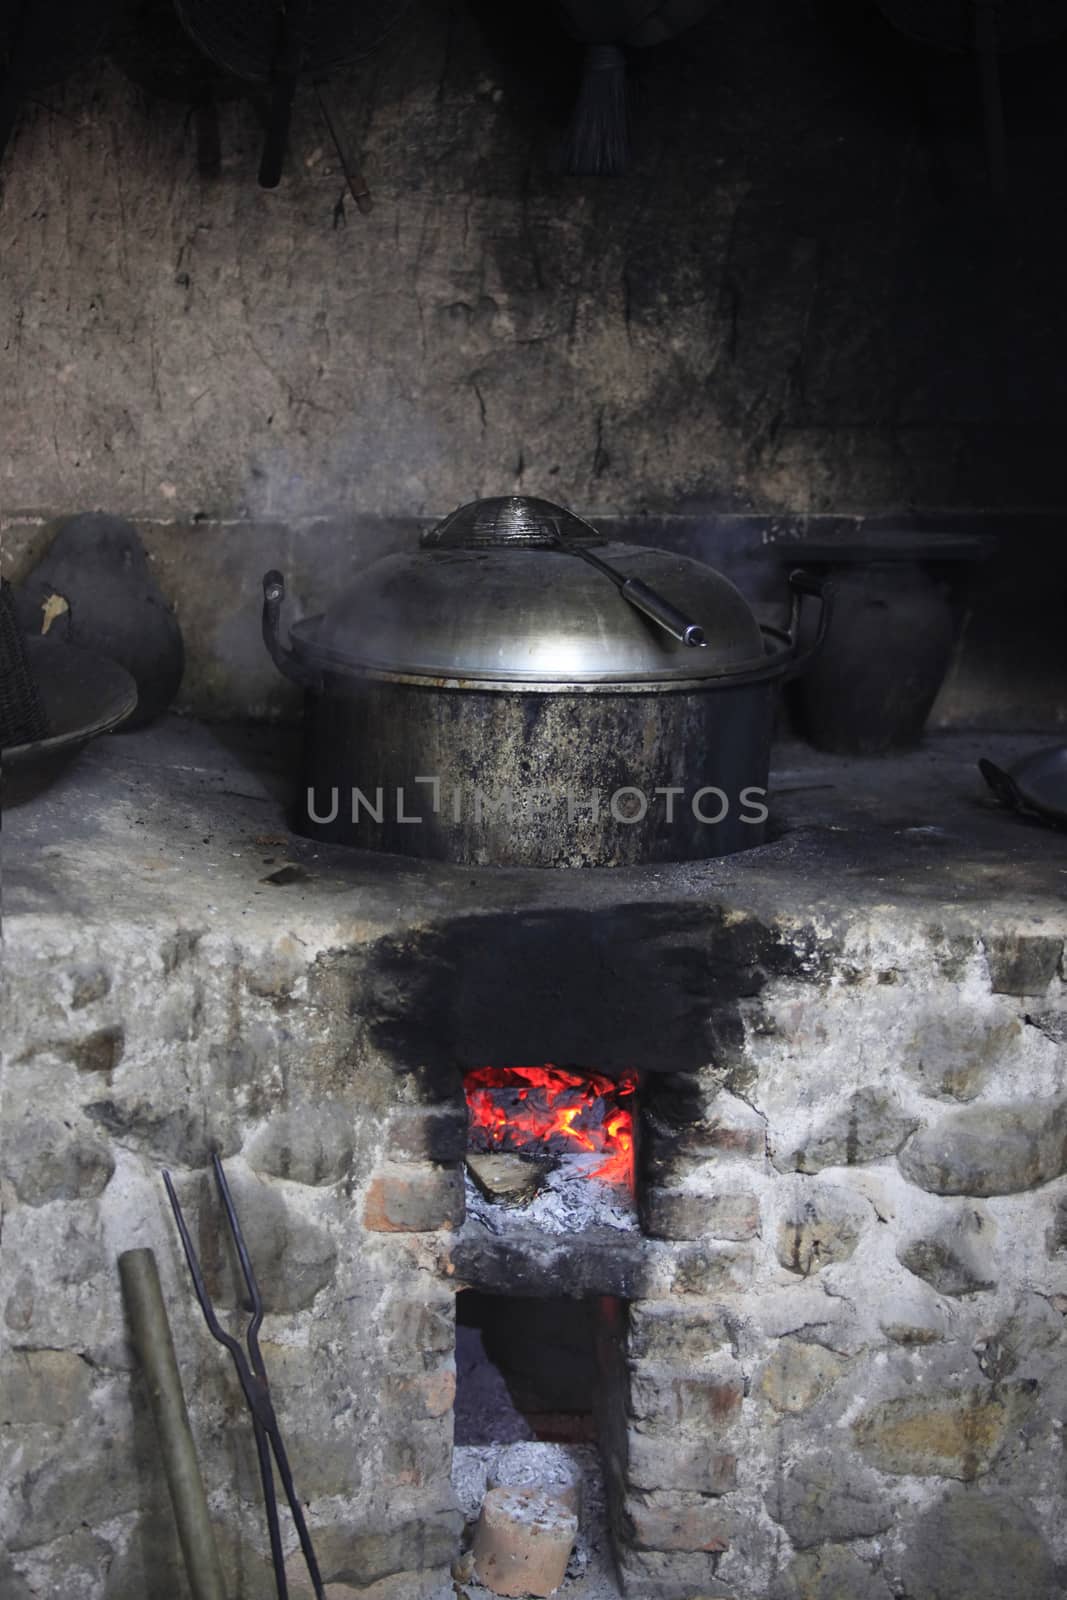 An old stone stove with an old saucepan. China